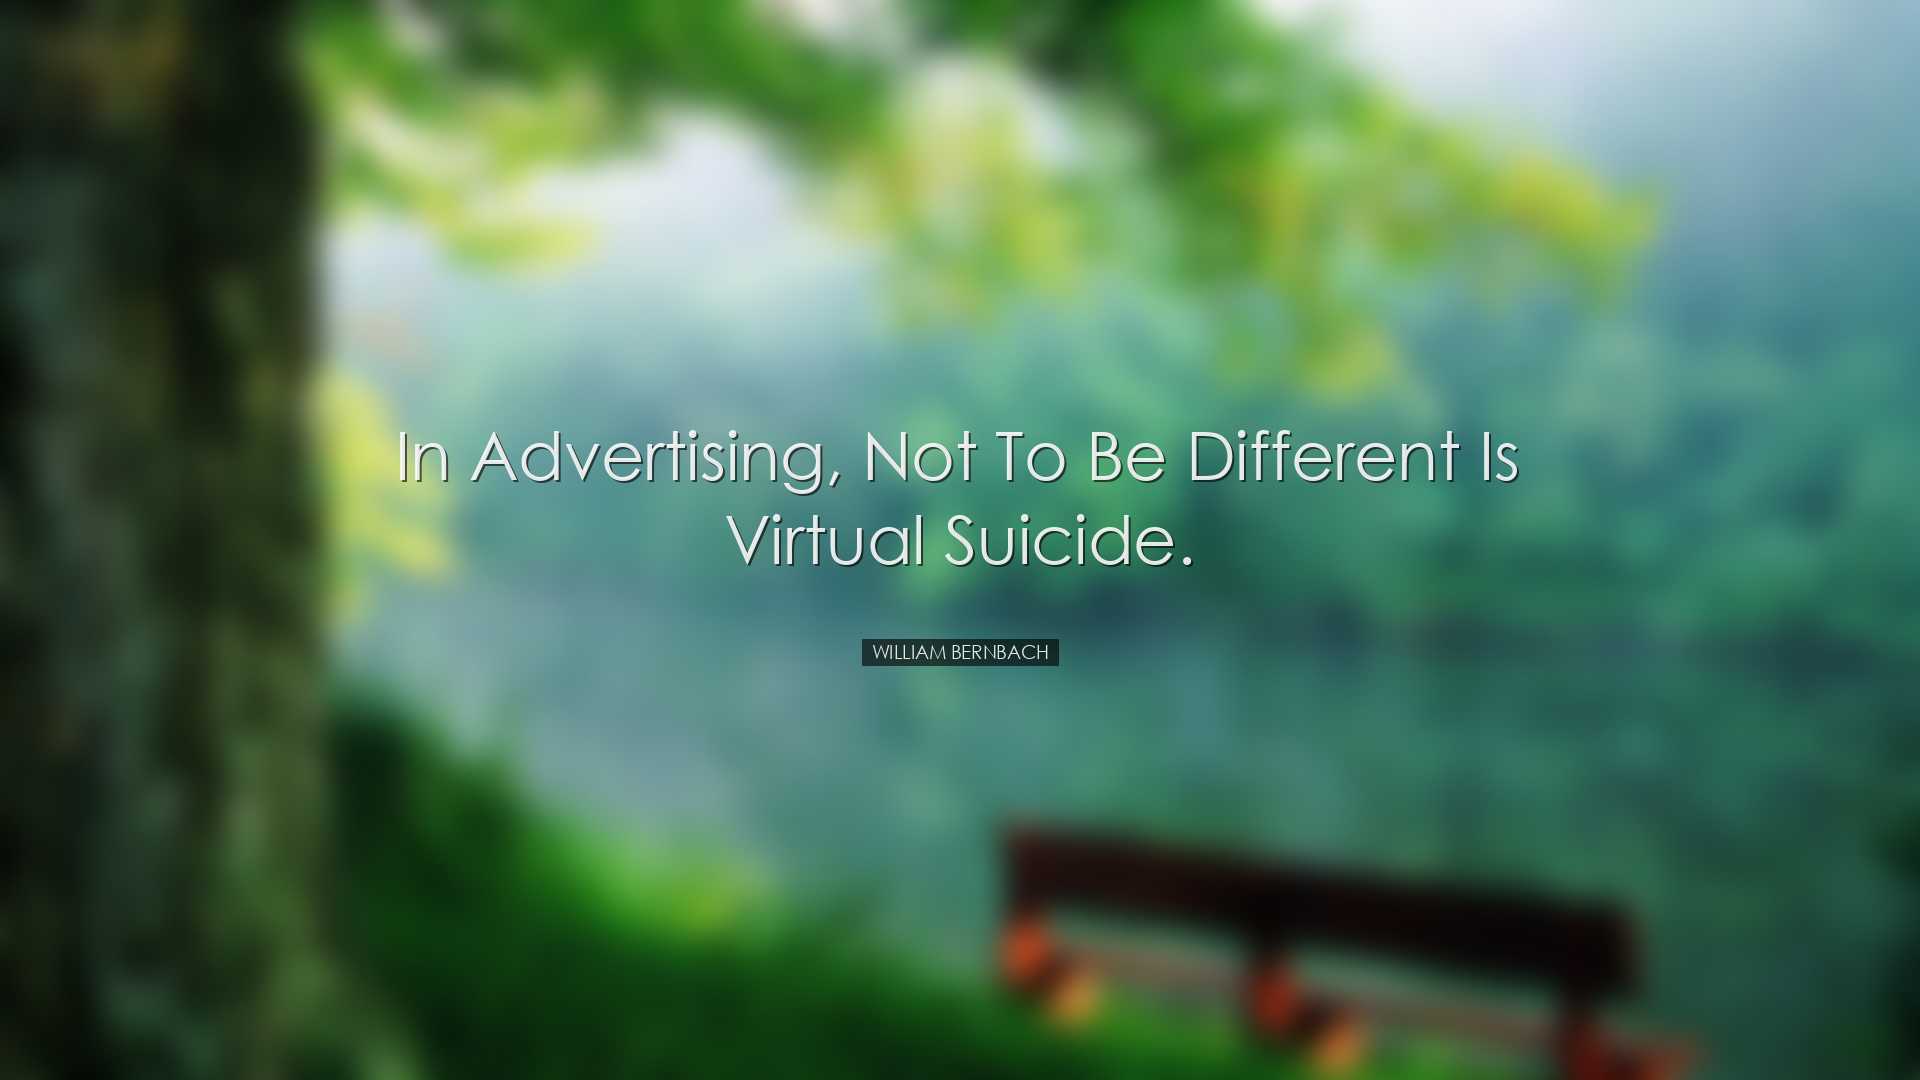 In advertising, not to be different is virtual suicide. - William